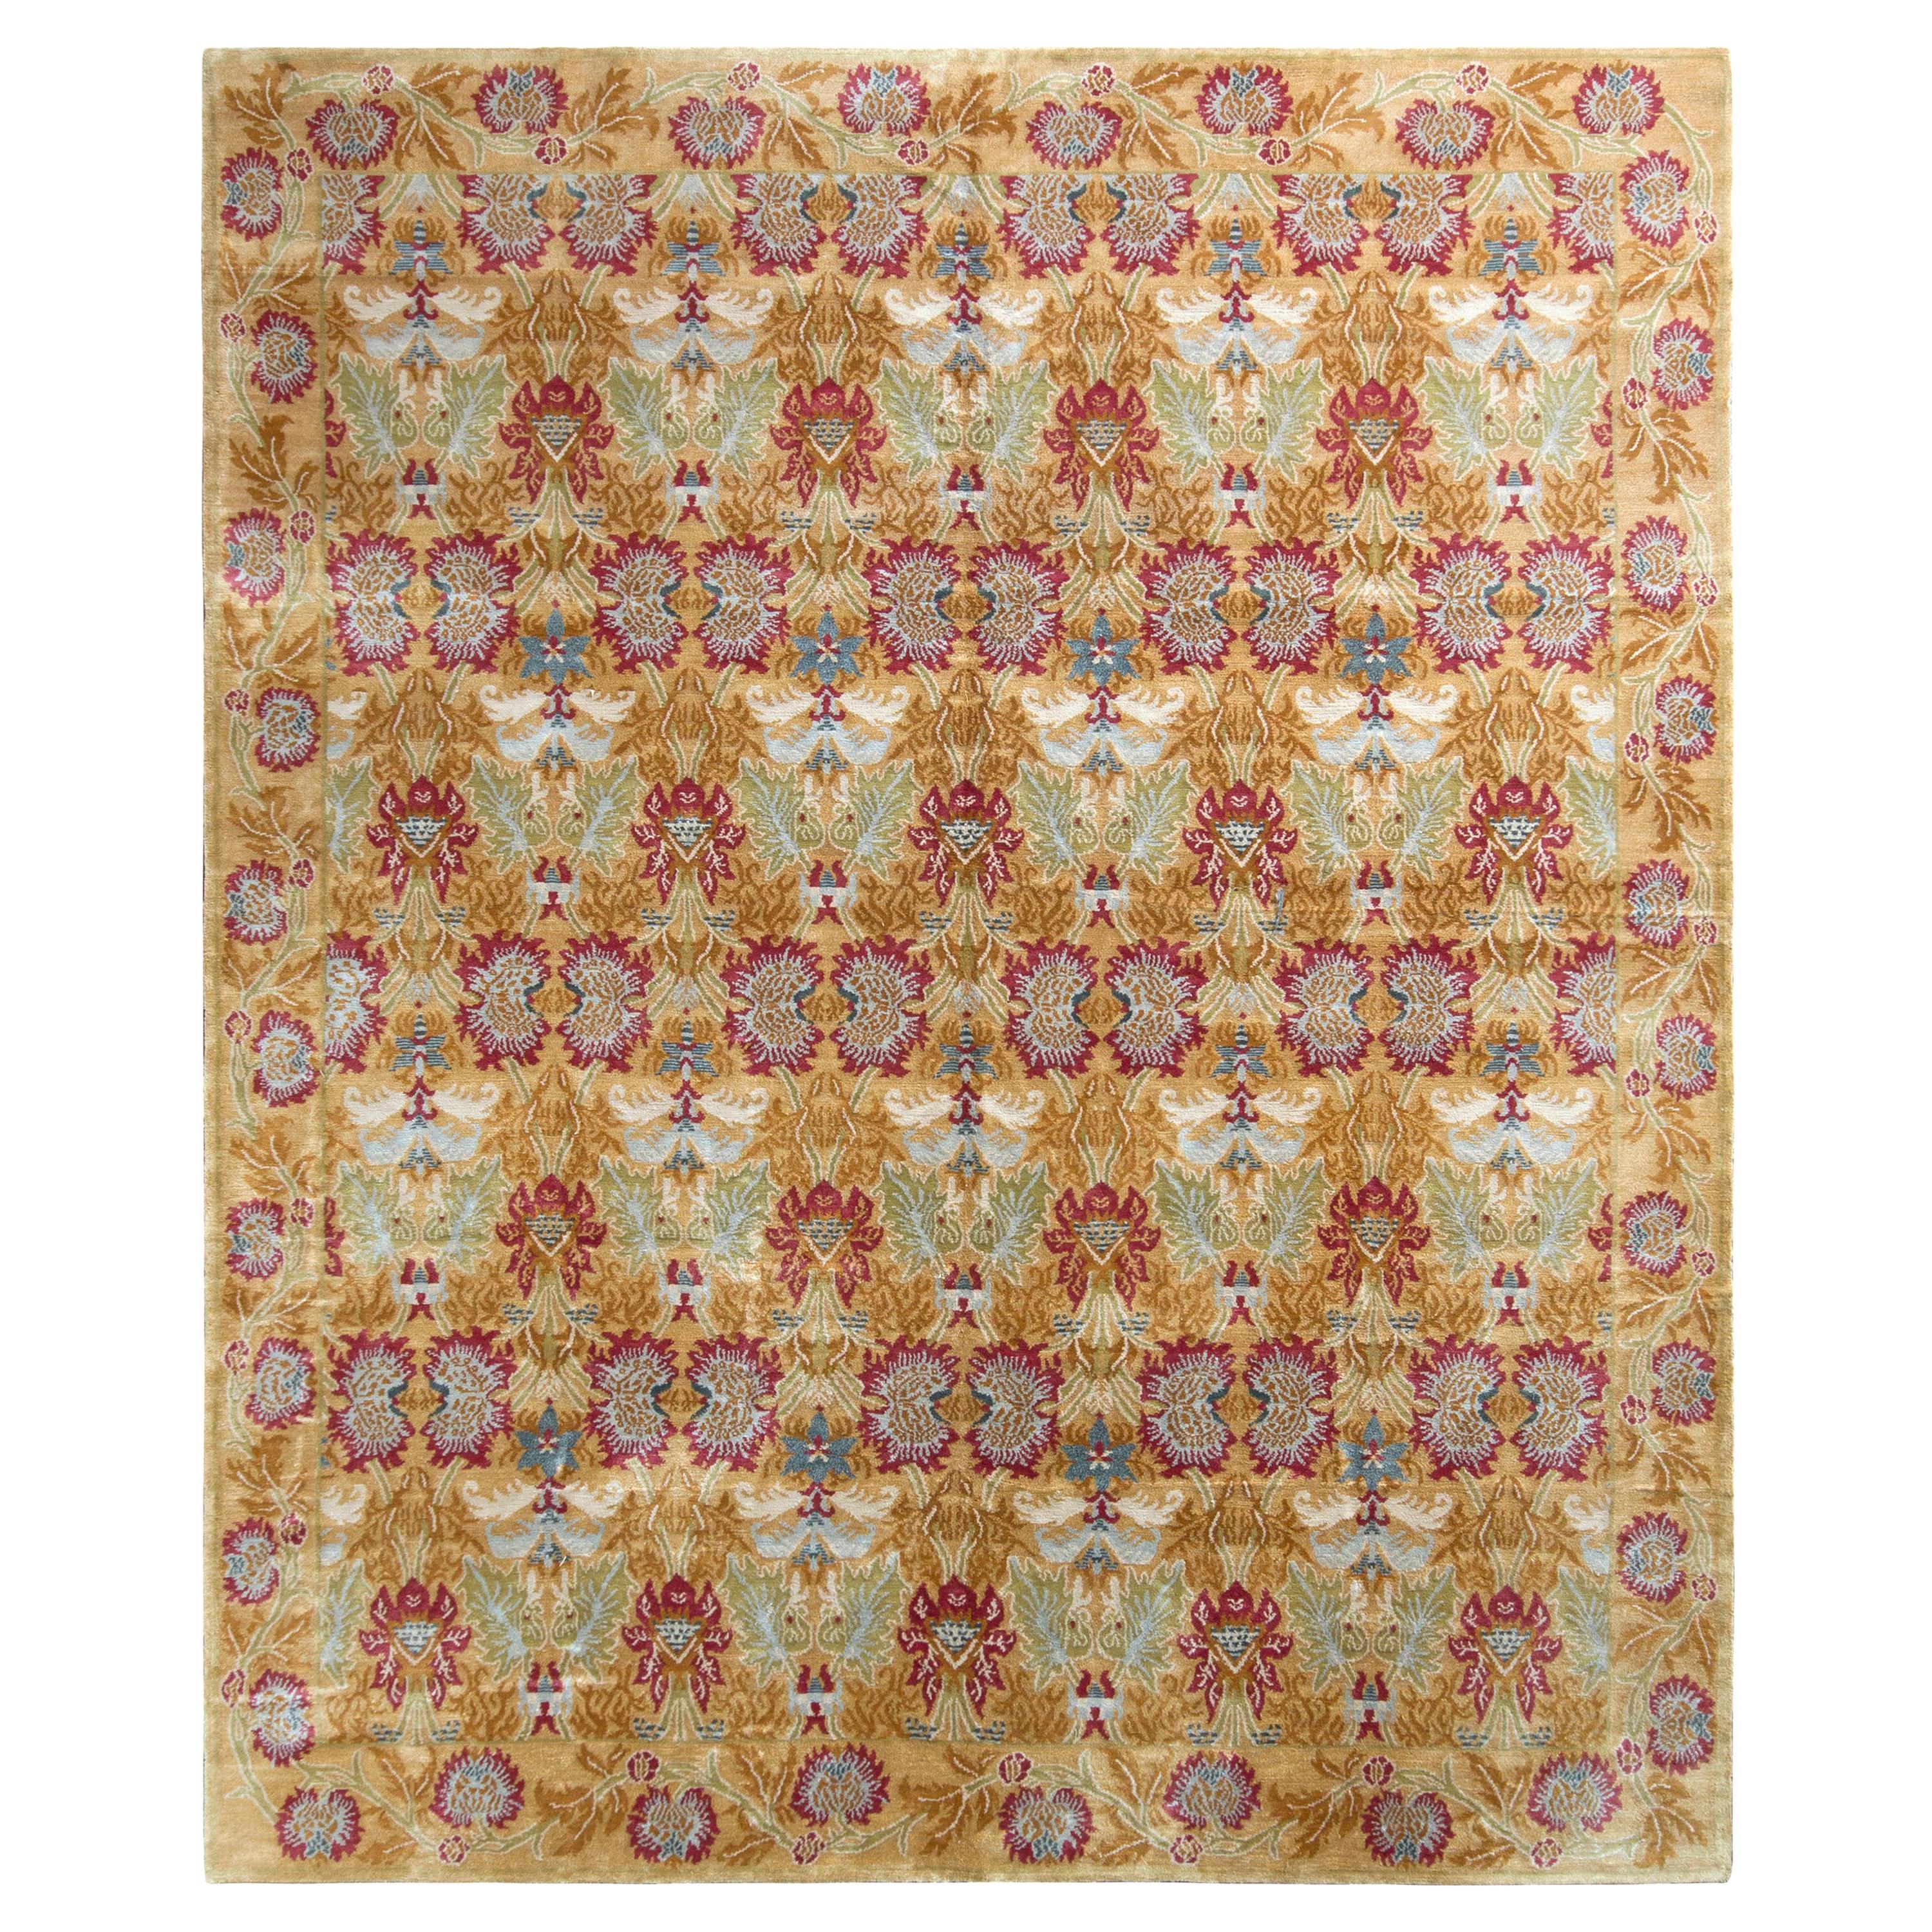 Rug & Kilim’s European Style Rug in Gold and Red All over Floral Pattern For Sale